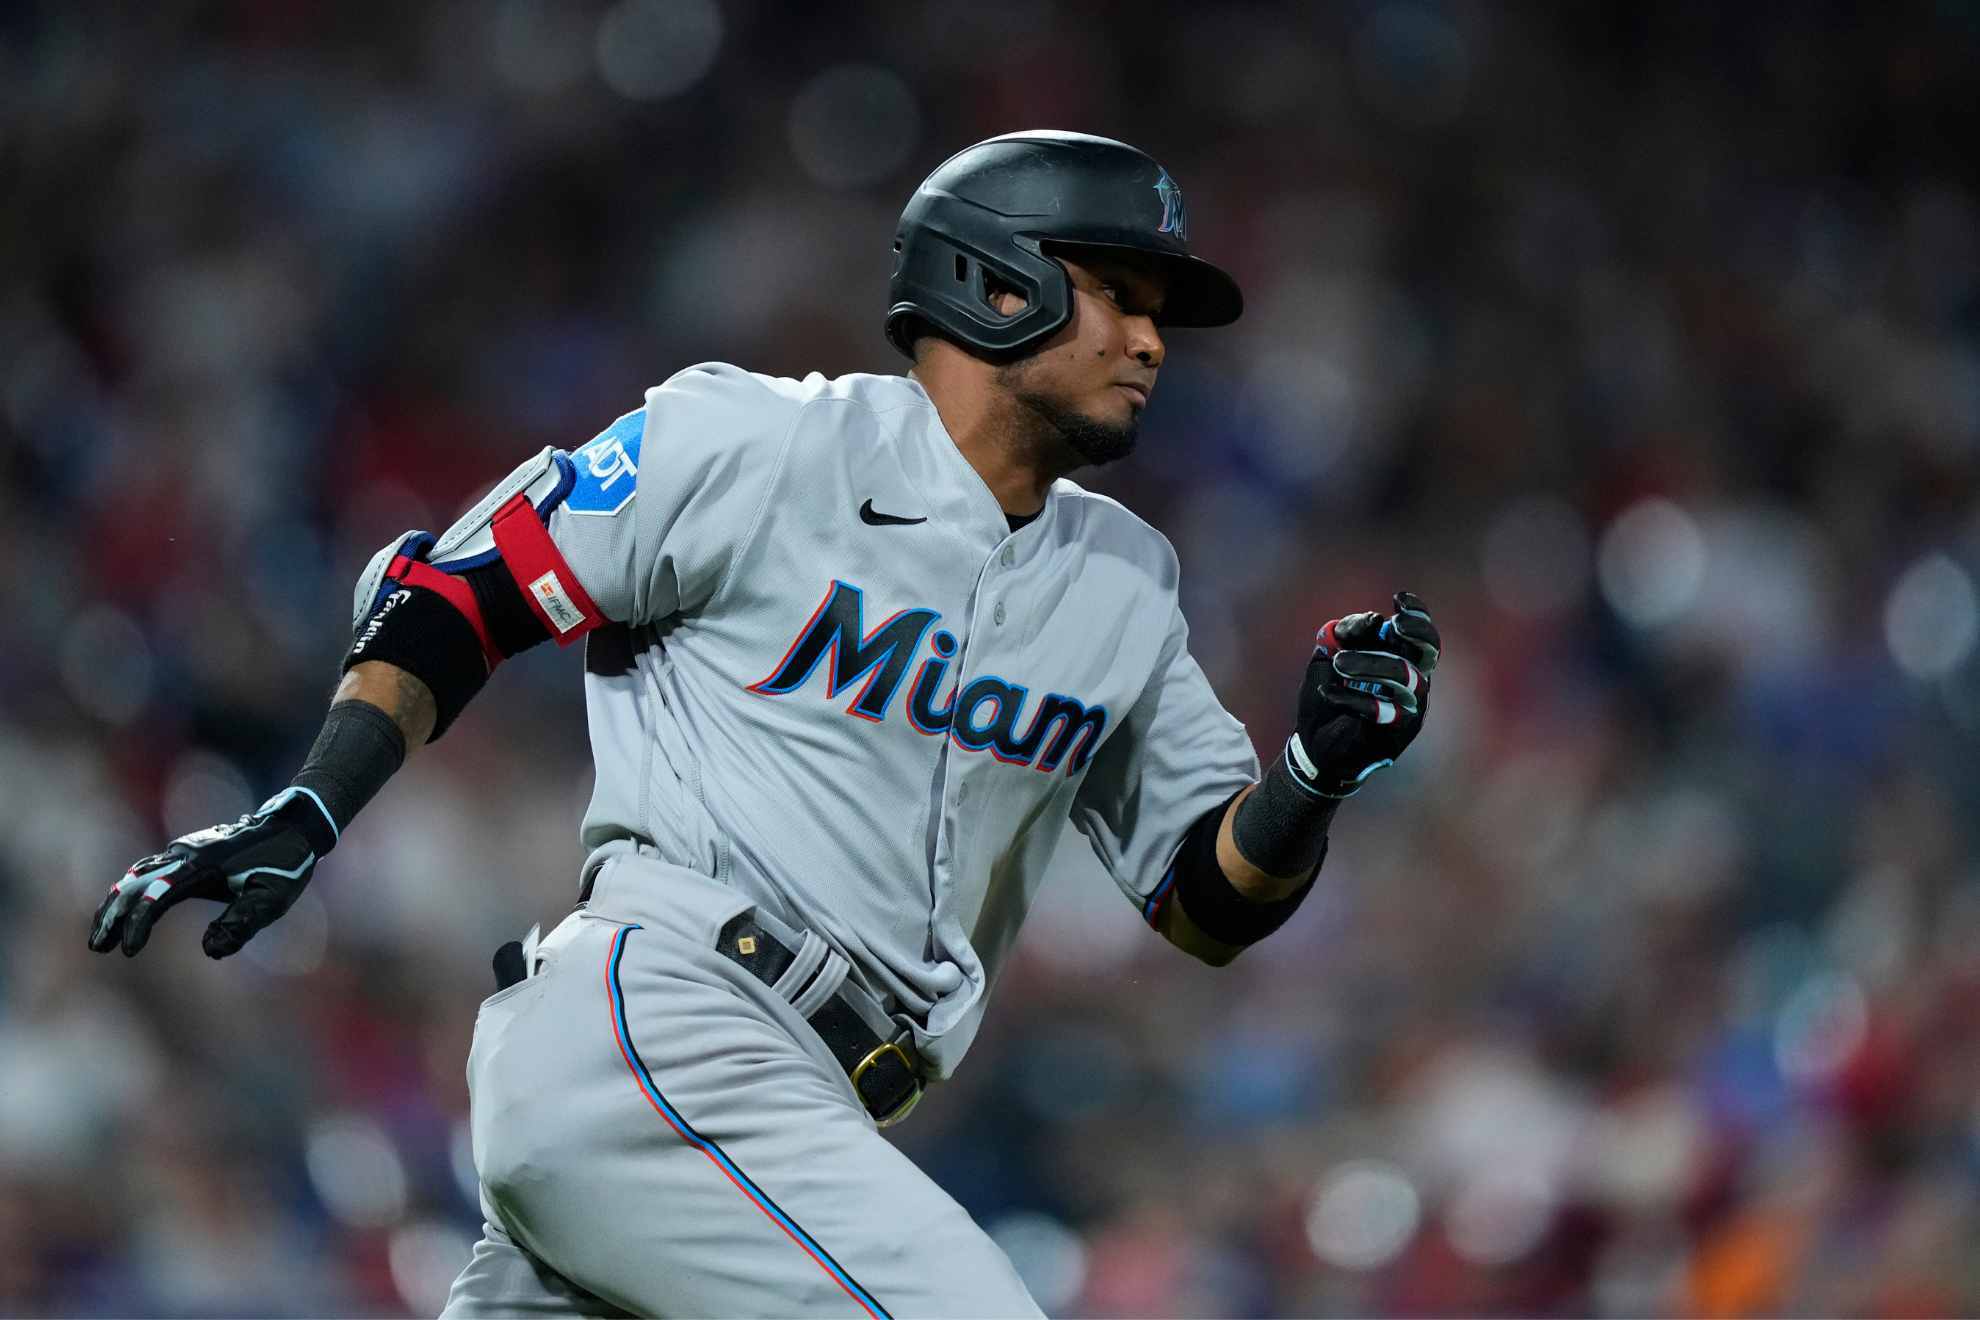 Miami Marlins' Luis Arraez made franchise history by hitting the ever-elusive baseball cycle: a single, a double, a triple, and a home run in the same game.